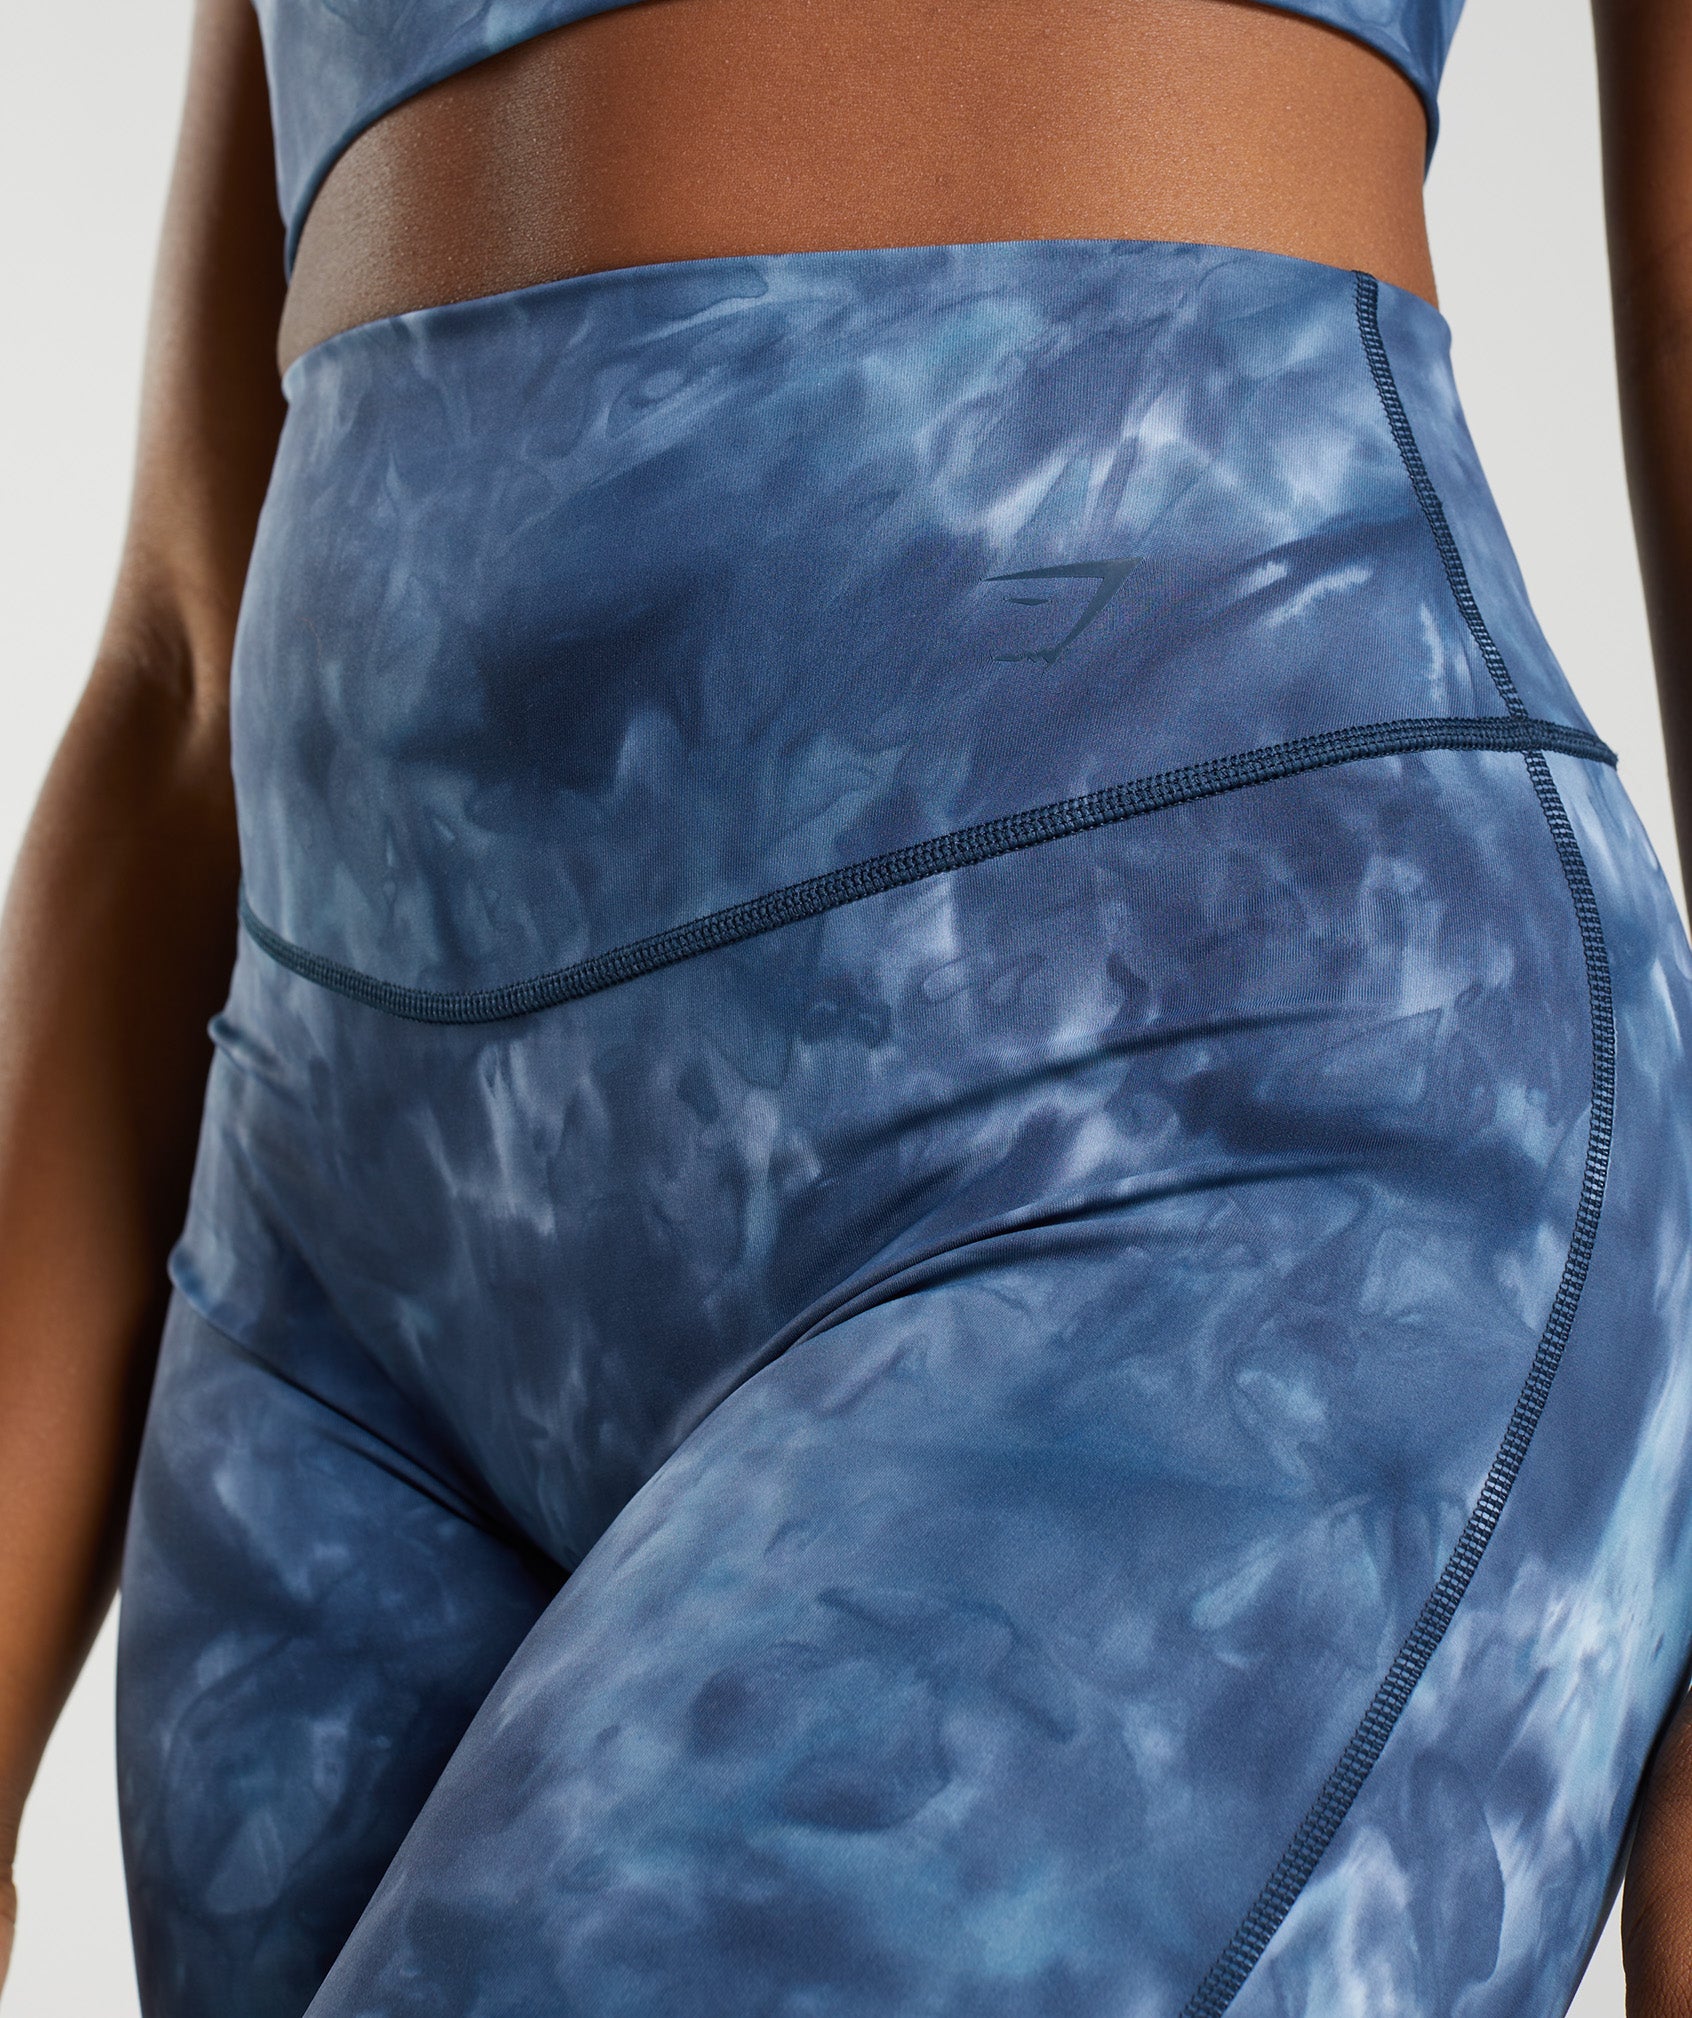 Elevate Cycling Shorts in Lakeside Blue Spray Dye - view 6